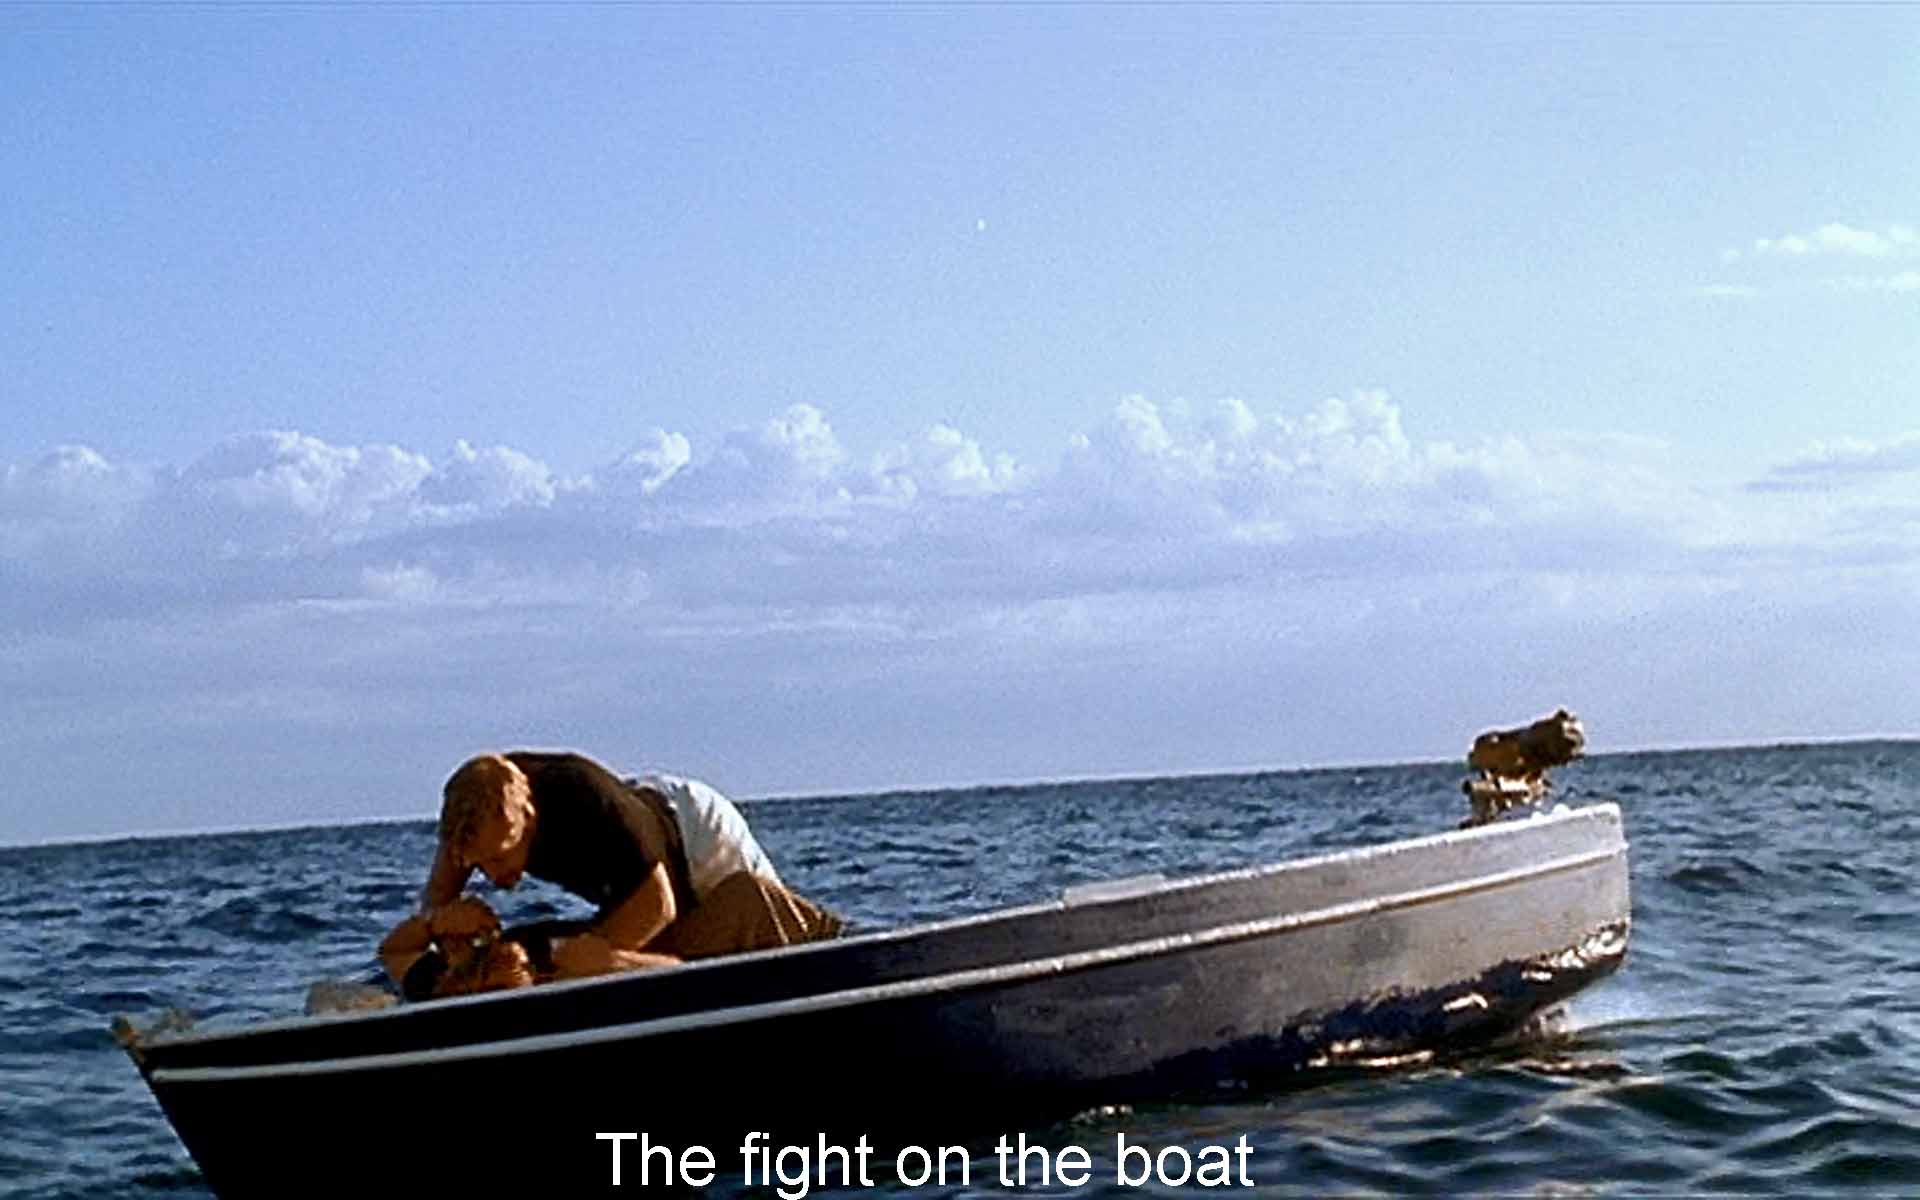 The fight on the boat